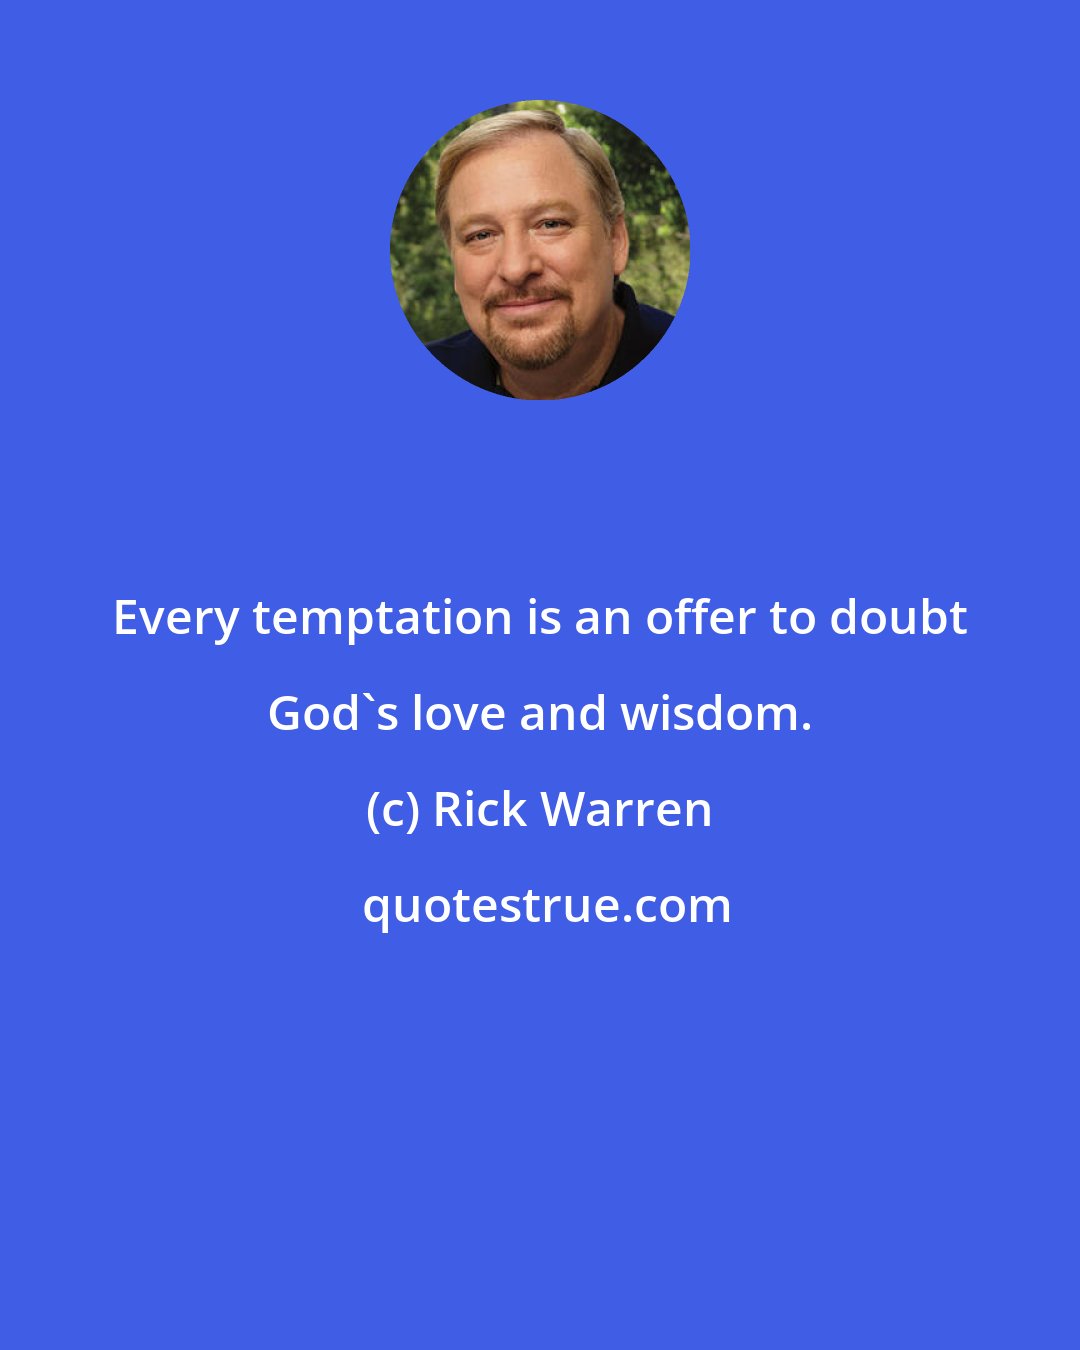 Rick Warren: Every temptation is an offer to doubt God's love and wisdom.